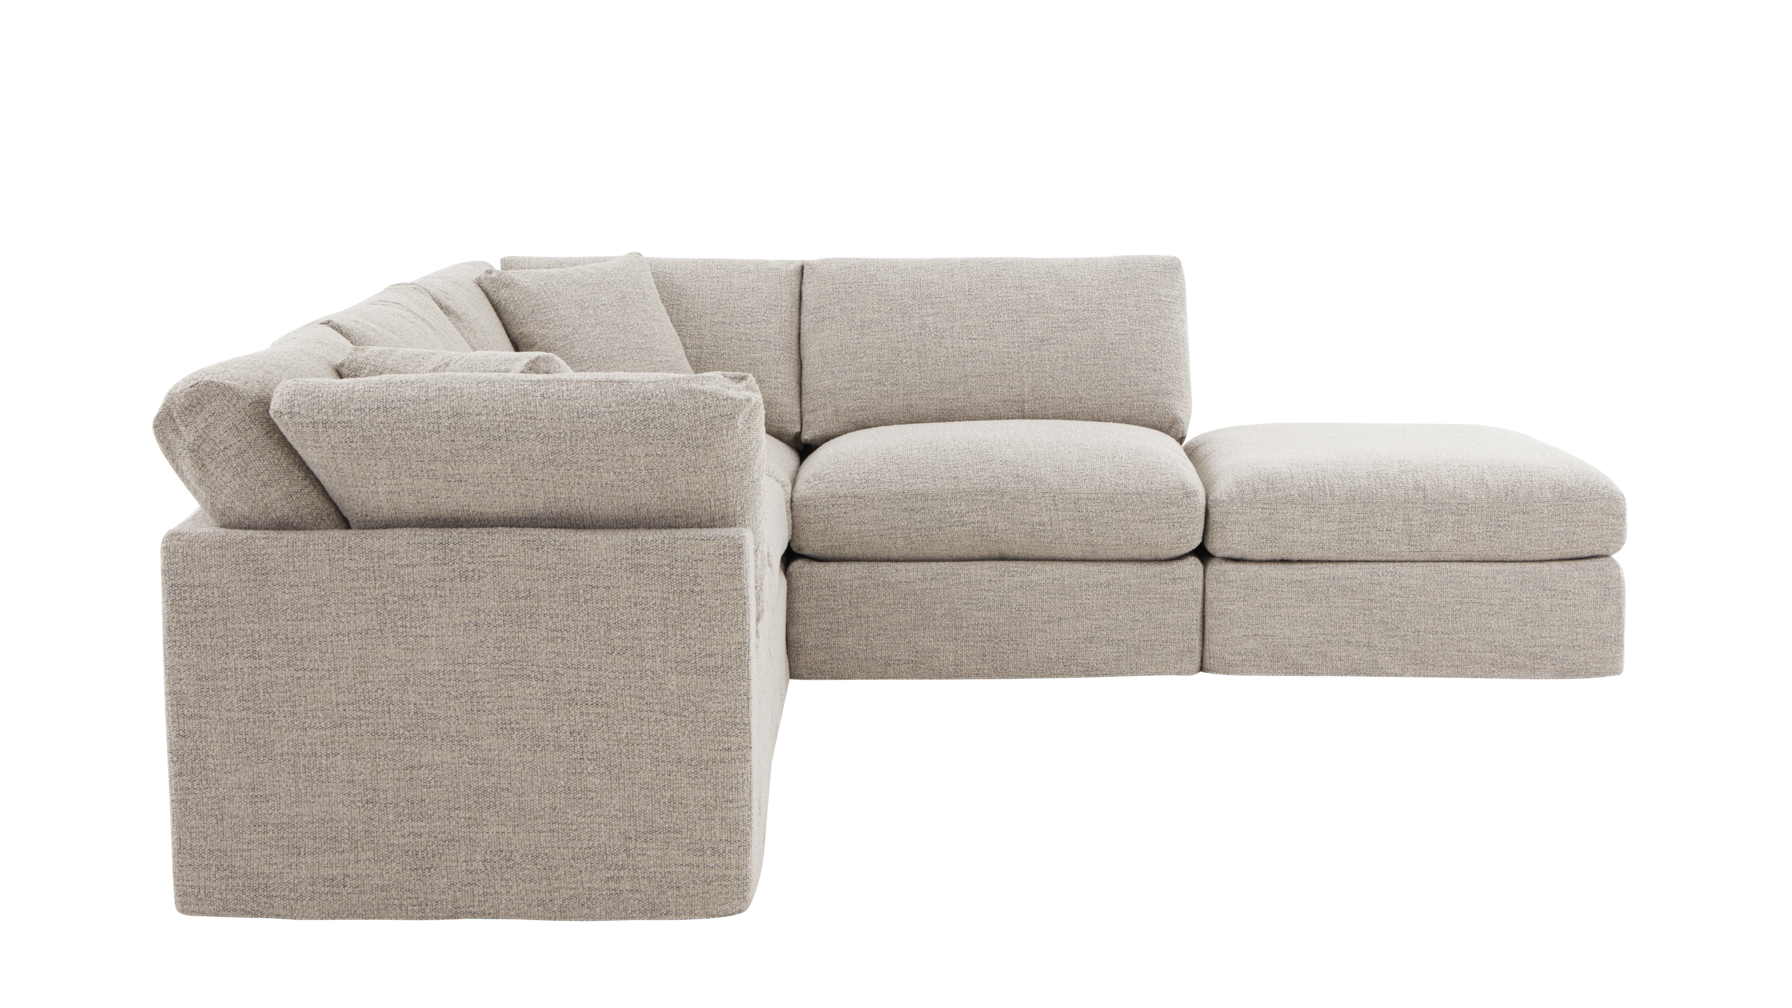 Get Together™ 5-Piece Modular Sectional, Standard, Oatmeal - Image 6